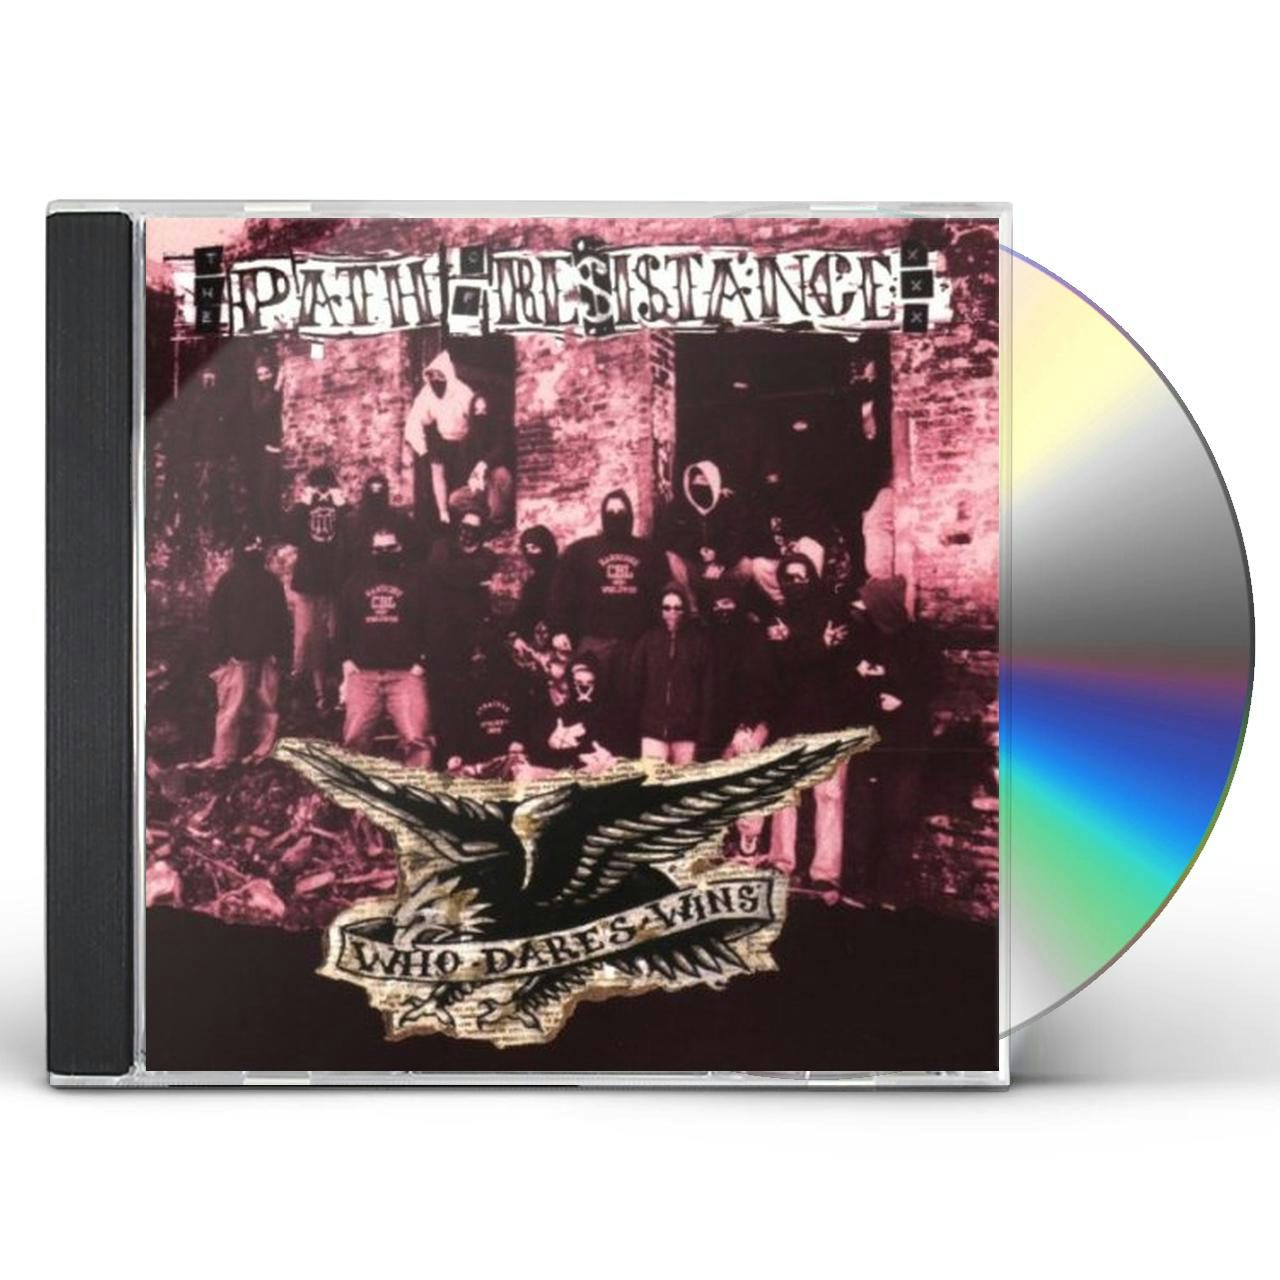 Path Of Resistance Who Dares Wins CD nyhc